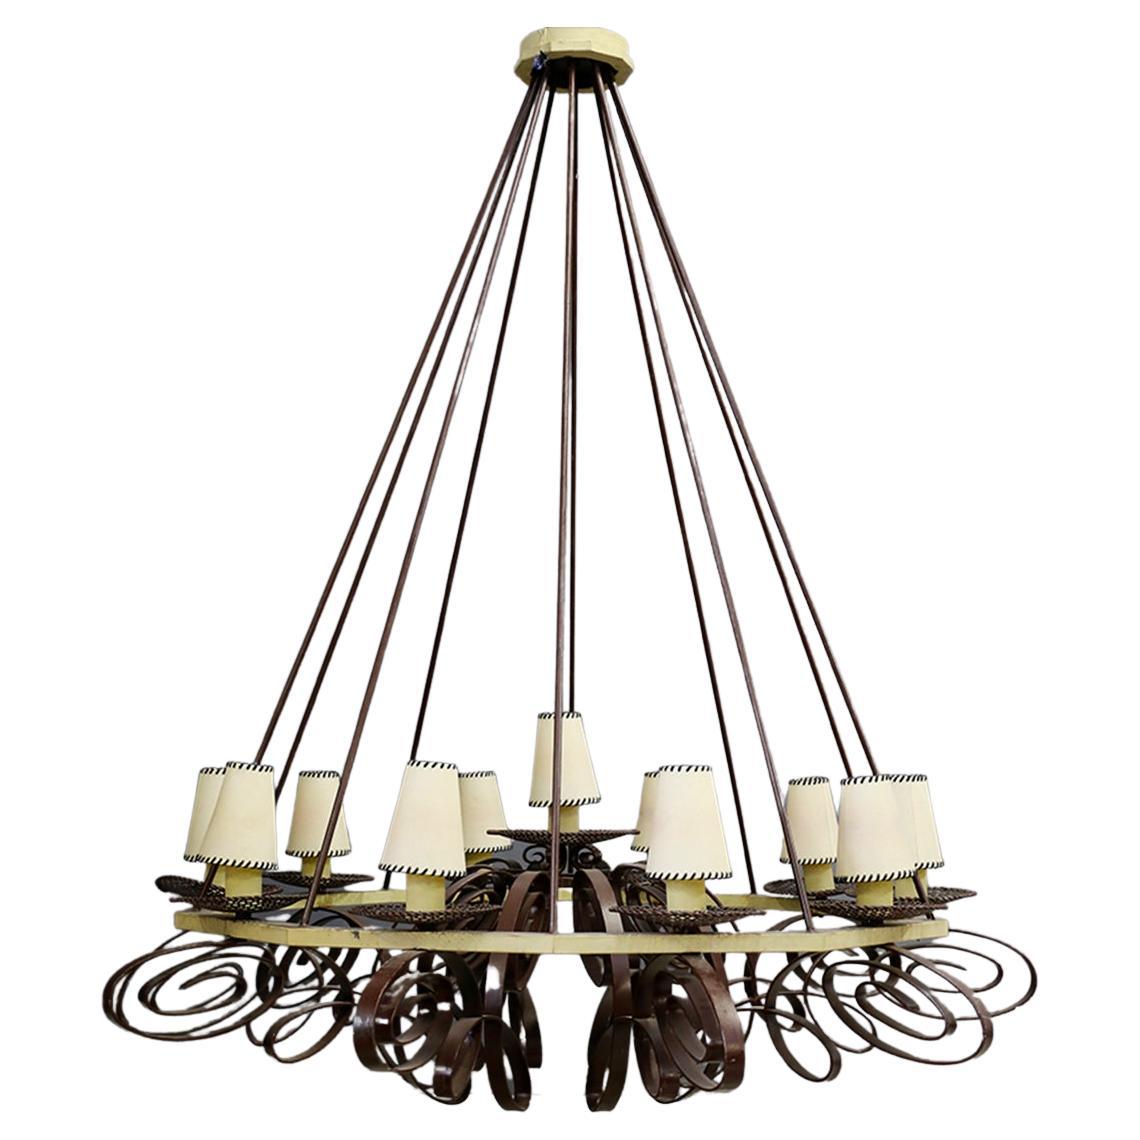 Impressive French Art Deco Chandelier in Painted Metal and Fabric